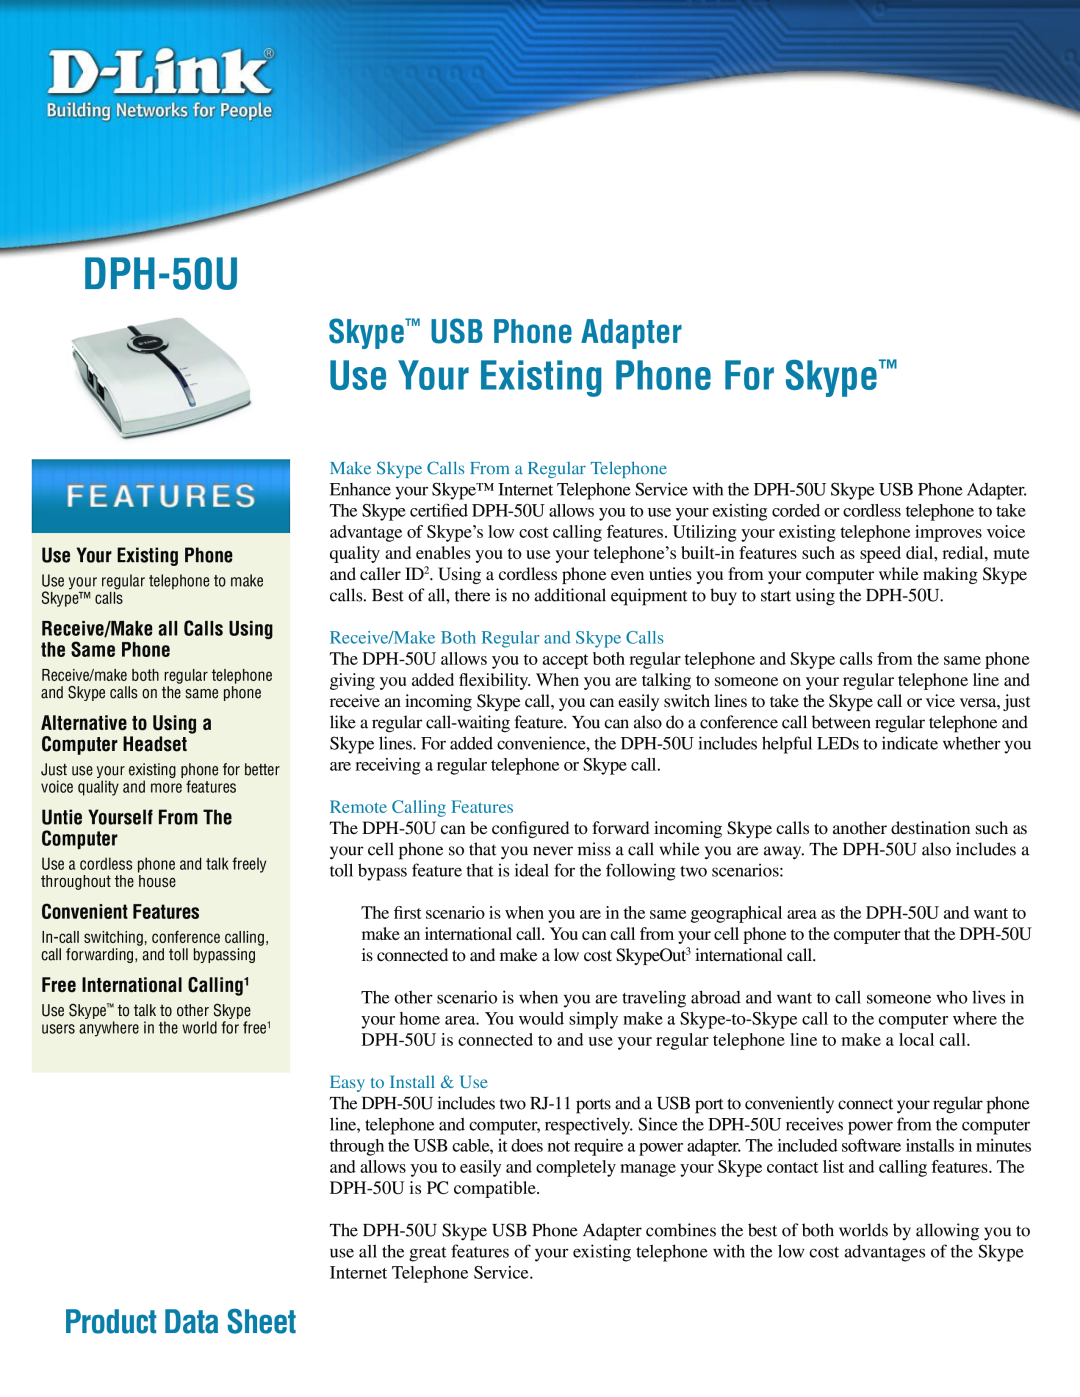 D-Link manual Version, DPH-50U VoIP USB Phone Adapter, Quick User Guide 